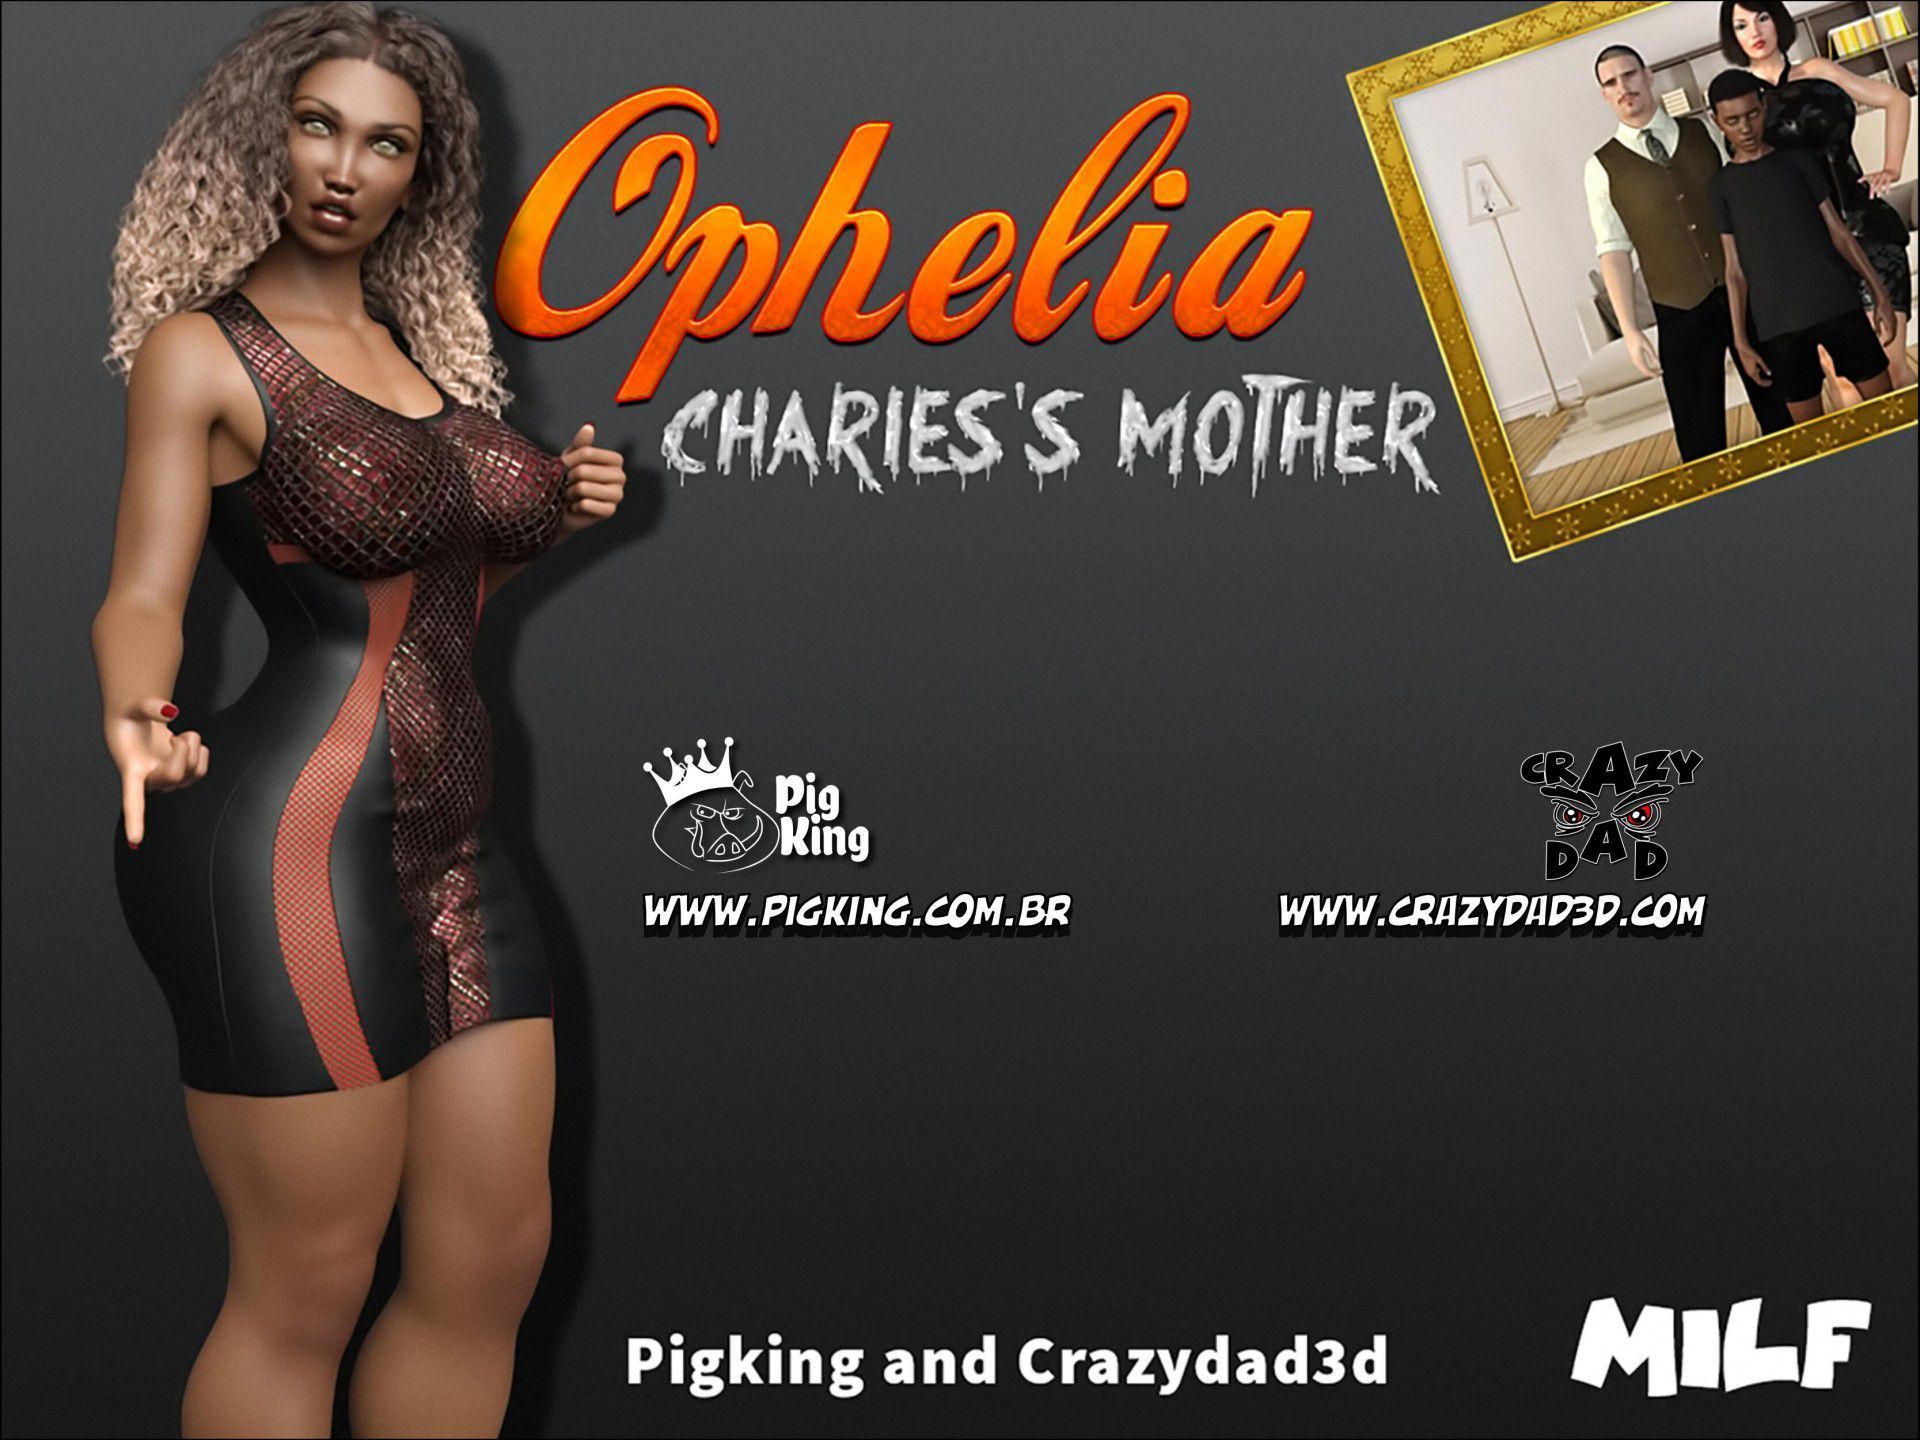 Charless Mother Ophelia (PigKing) page 1